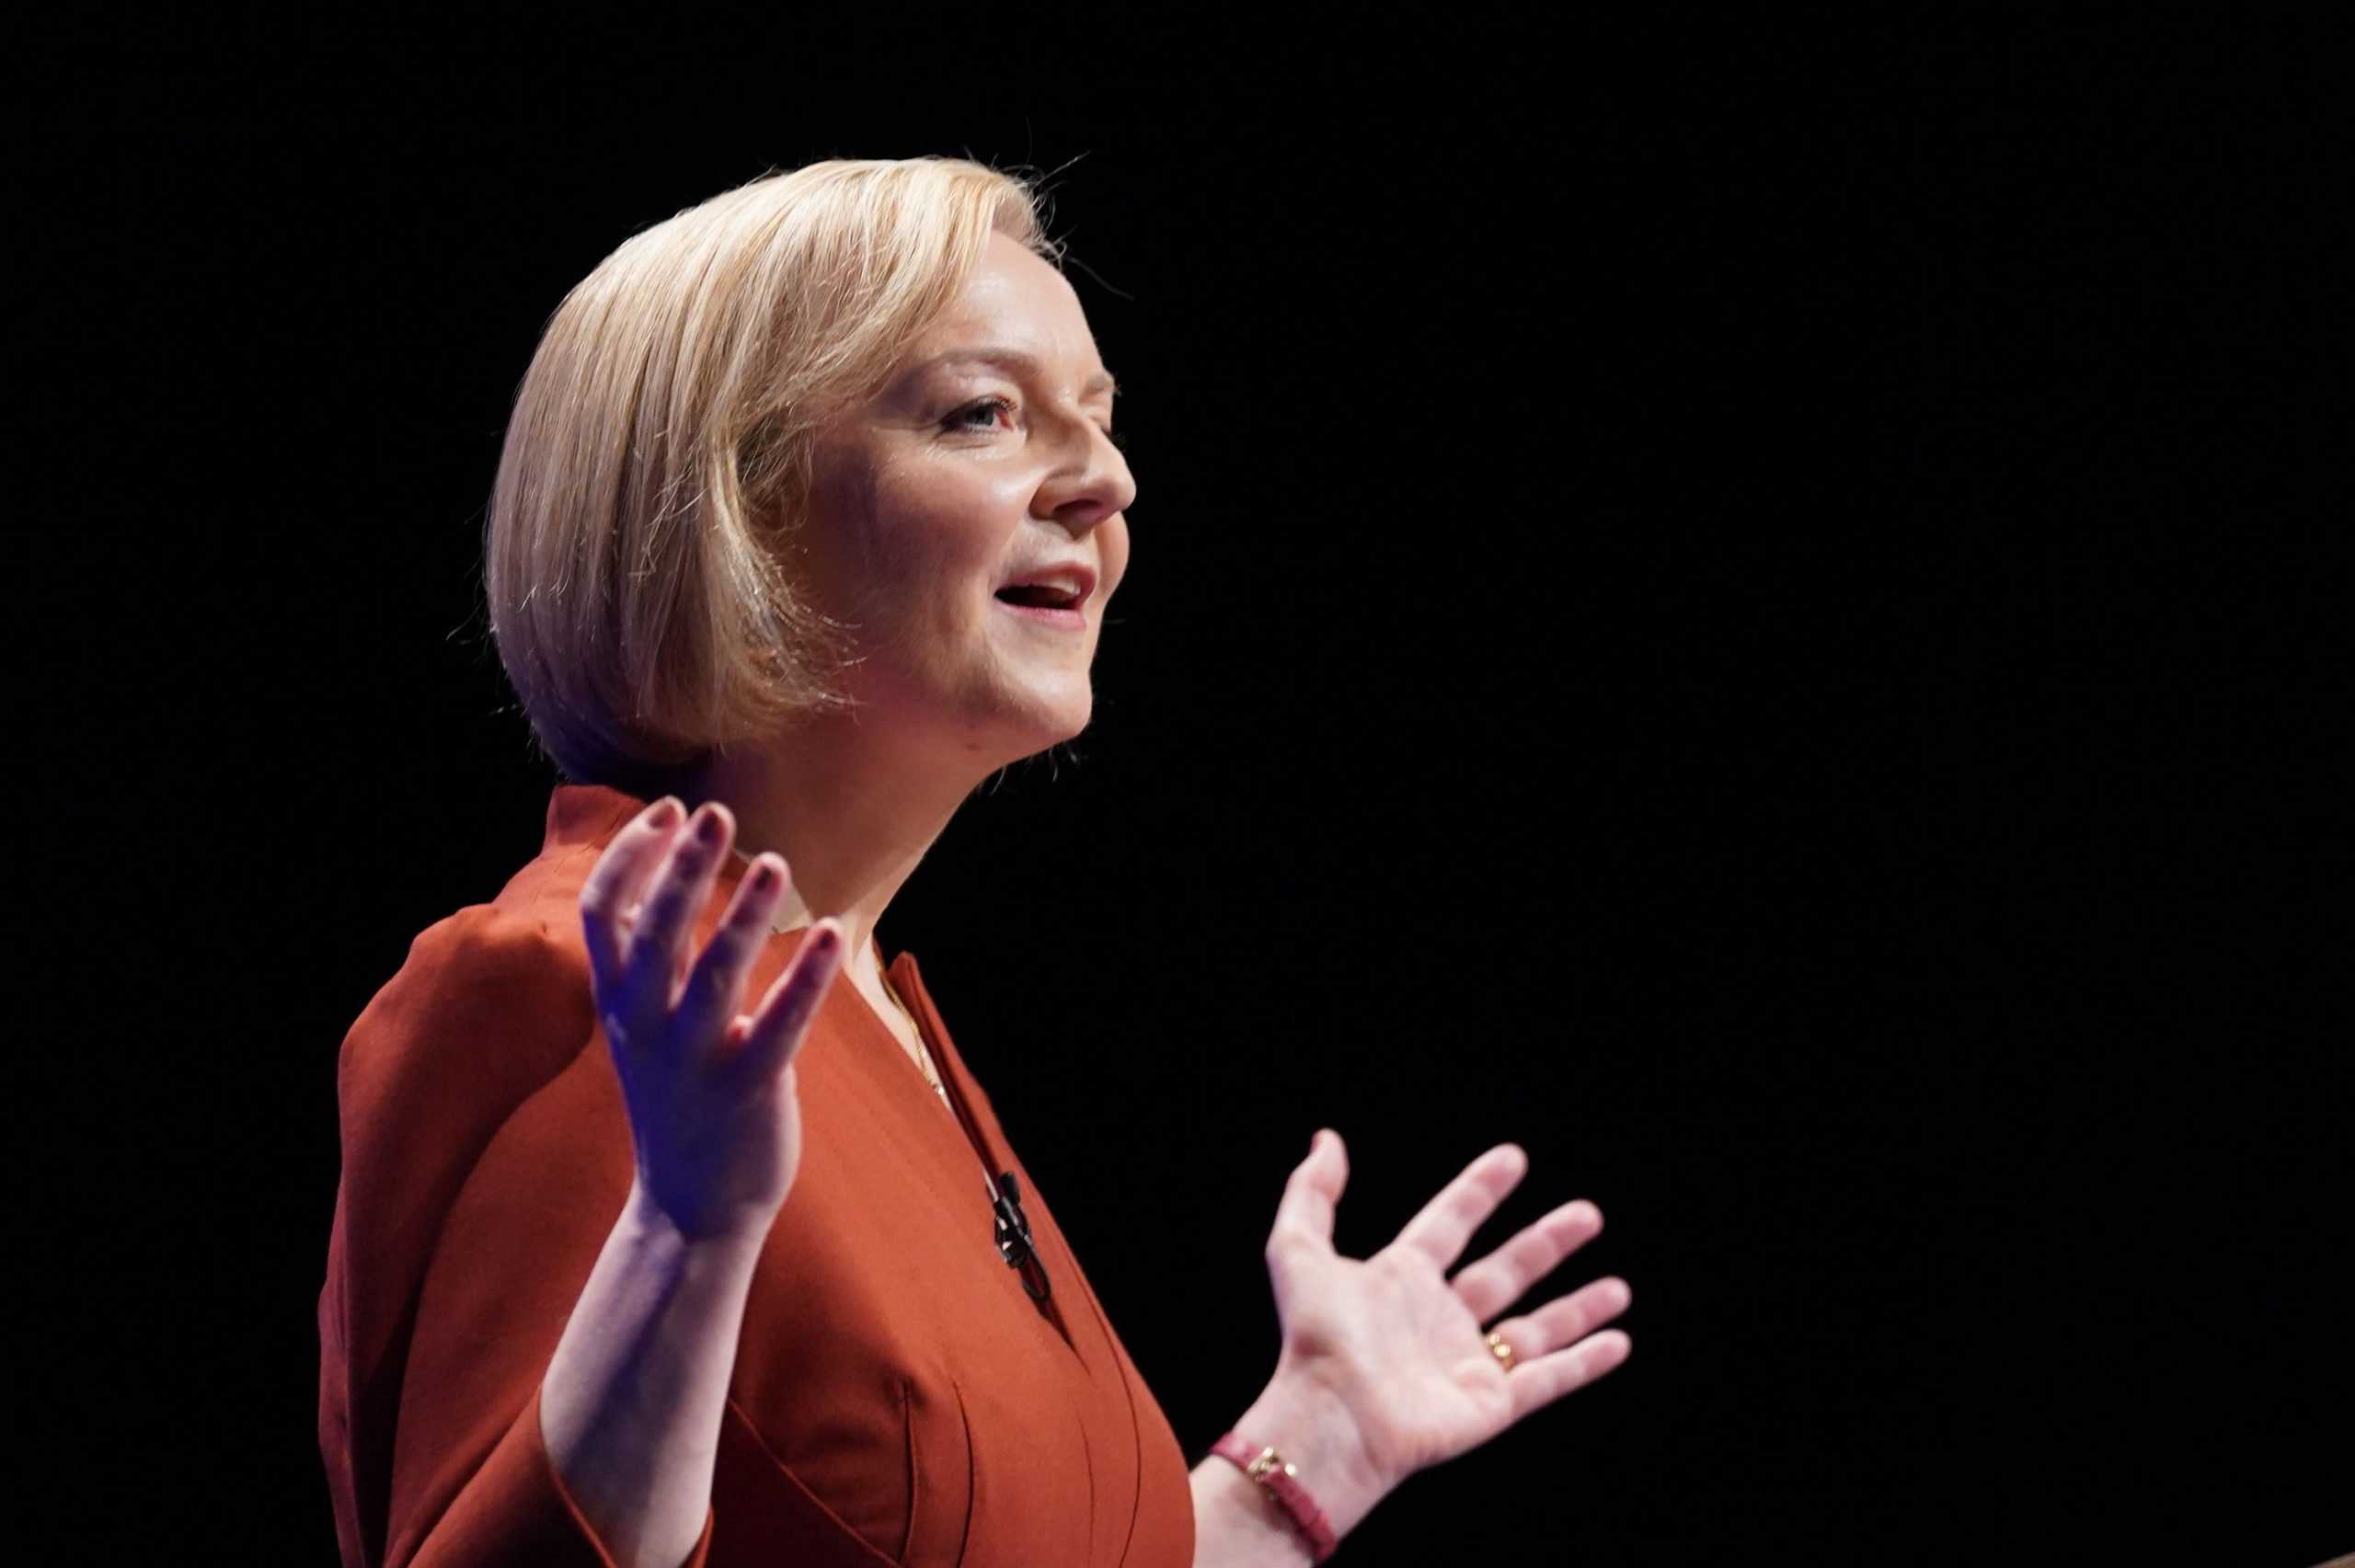 Cabinet ministers urge Tories to rally behind Truss or risk election defeat